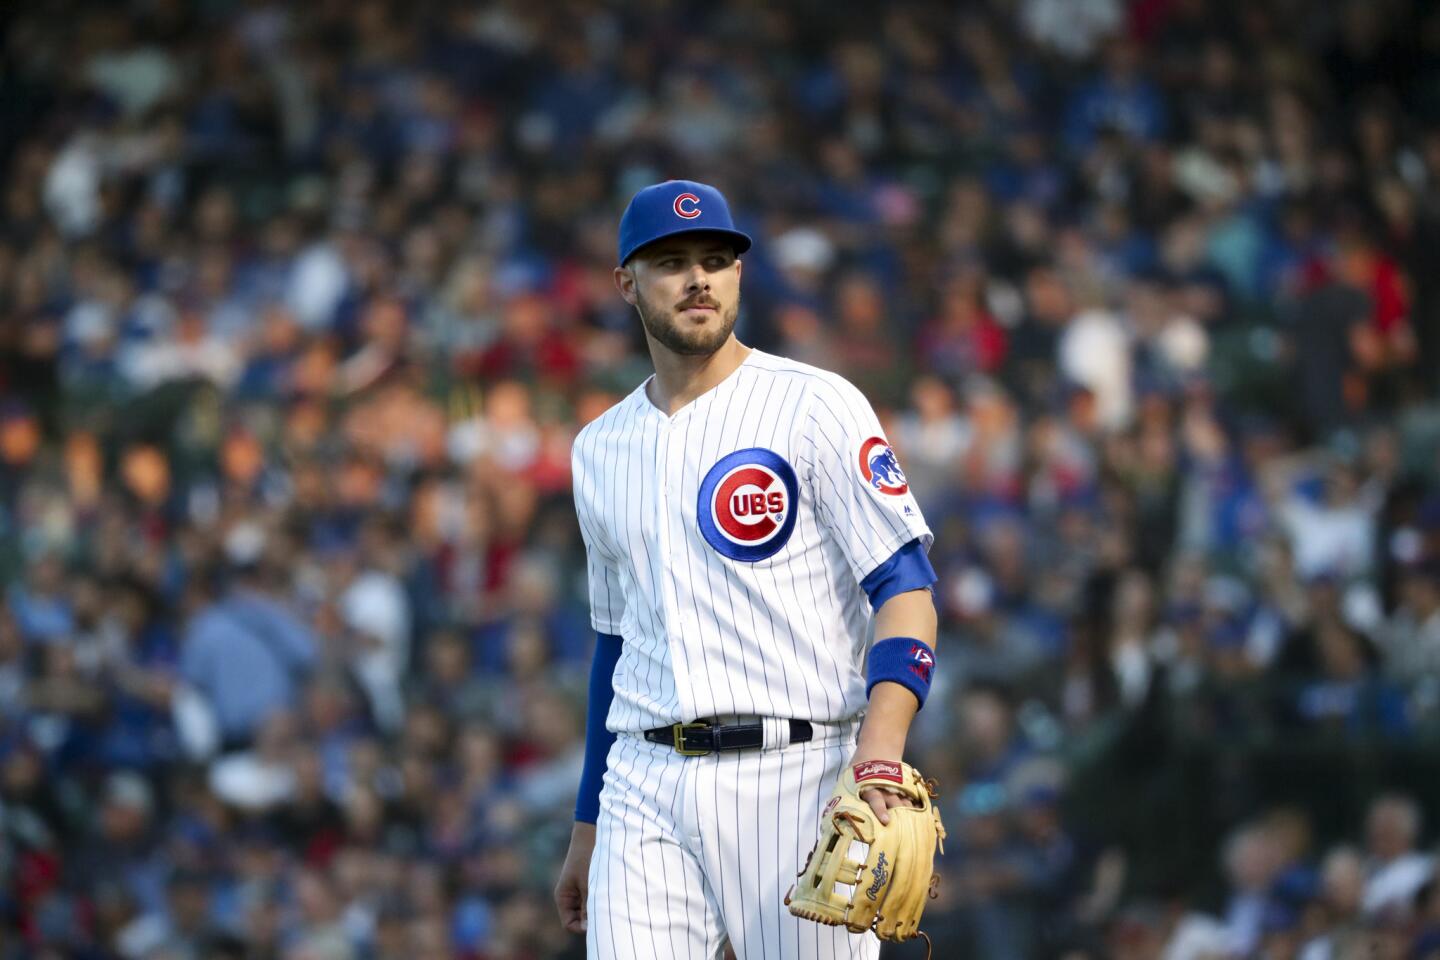 Cubs third baseman Kris Bryant walks on the field during the third inning against the Indians at Wrigley Field on Wednesday, May 23, 2018.